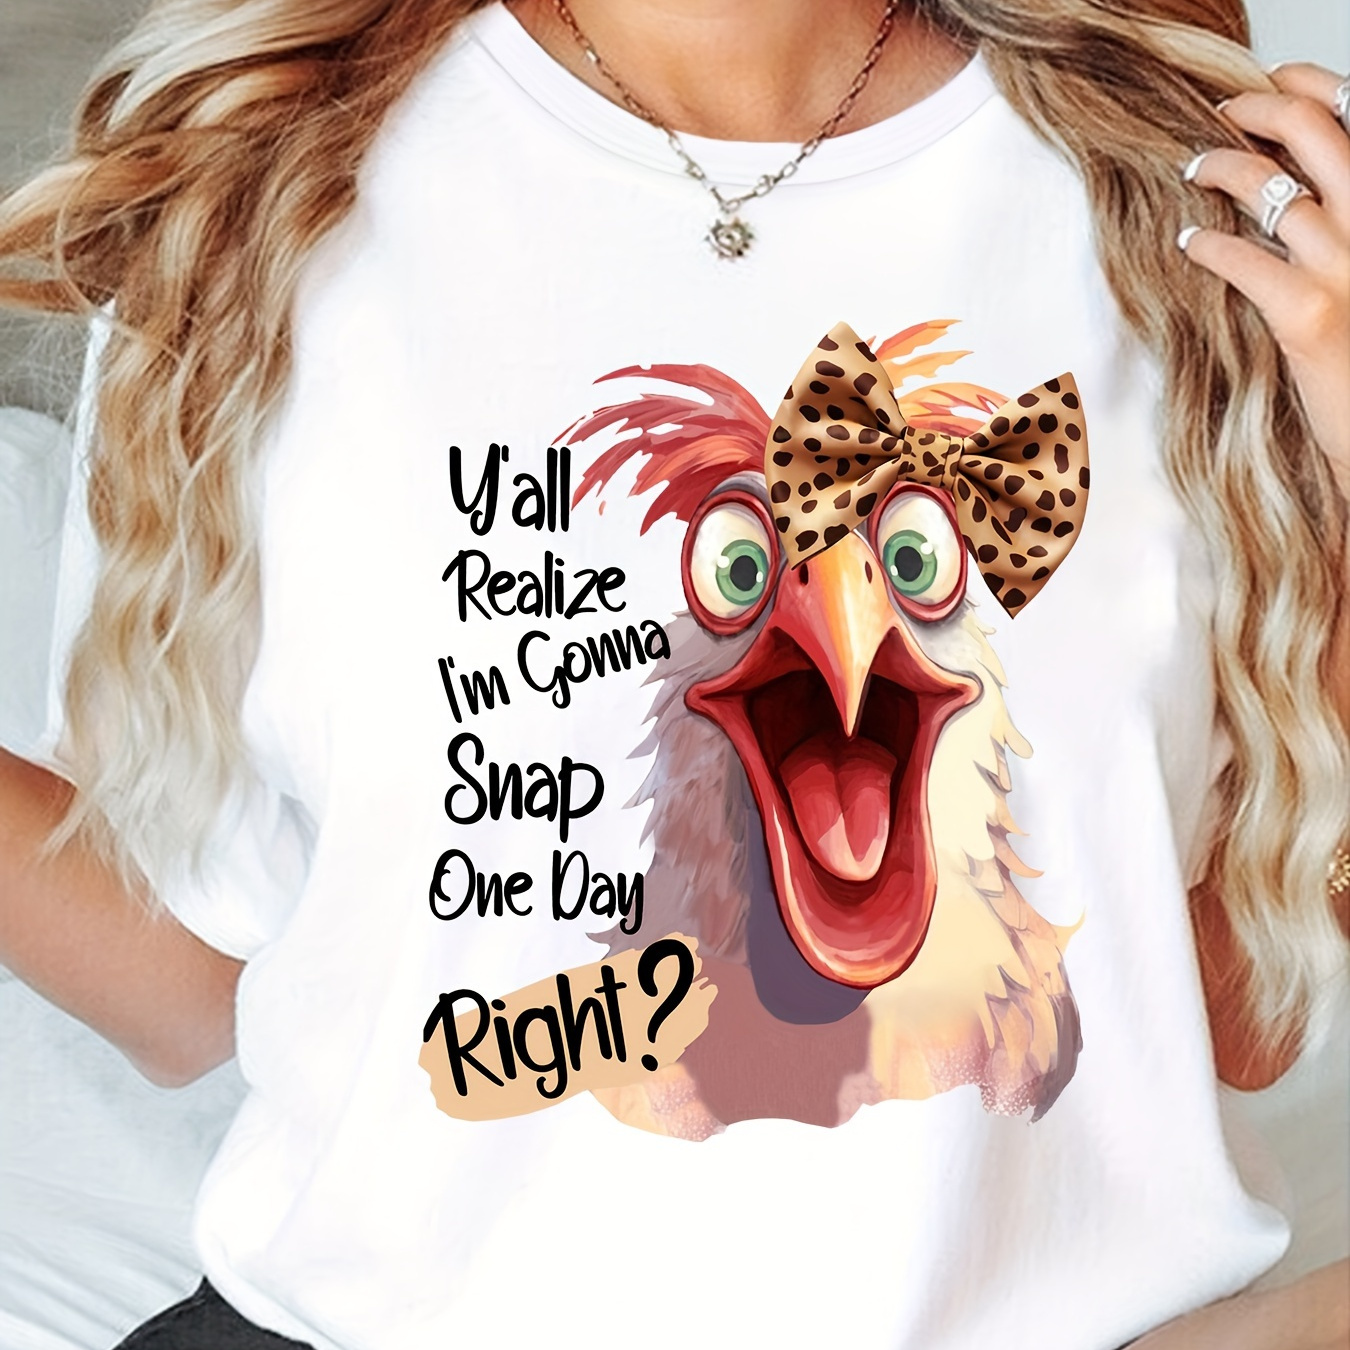 

Women's Casual Round Neck T-shirt With Leopard Print Bowtie & Chicken Graphic, Short Sleeve Tee For Spring & Summer, Sporty & Daily Wear Tops